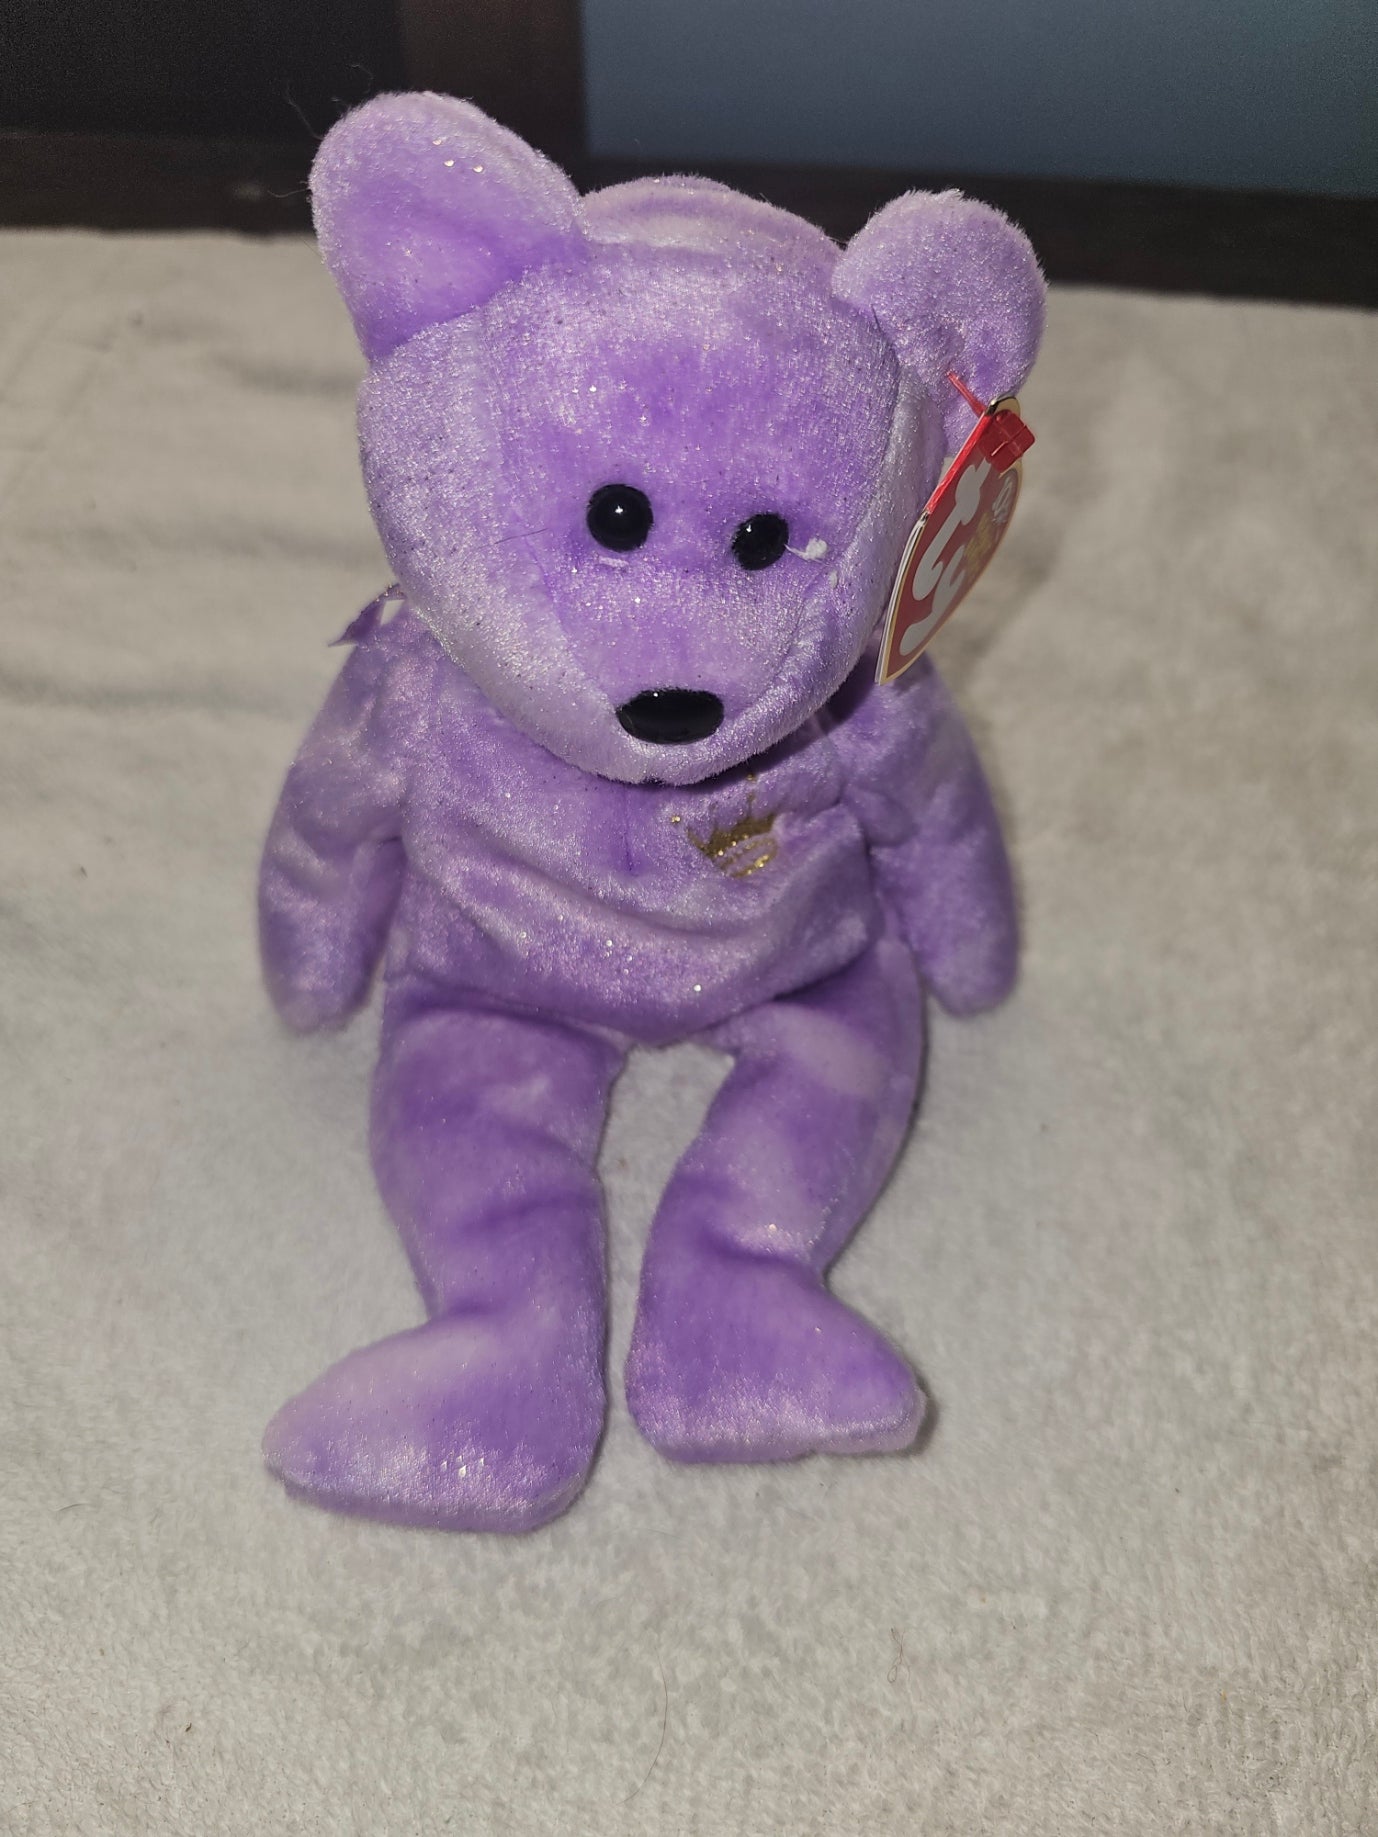 ty Beanie Baby: Yours Truly the Bear